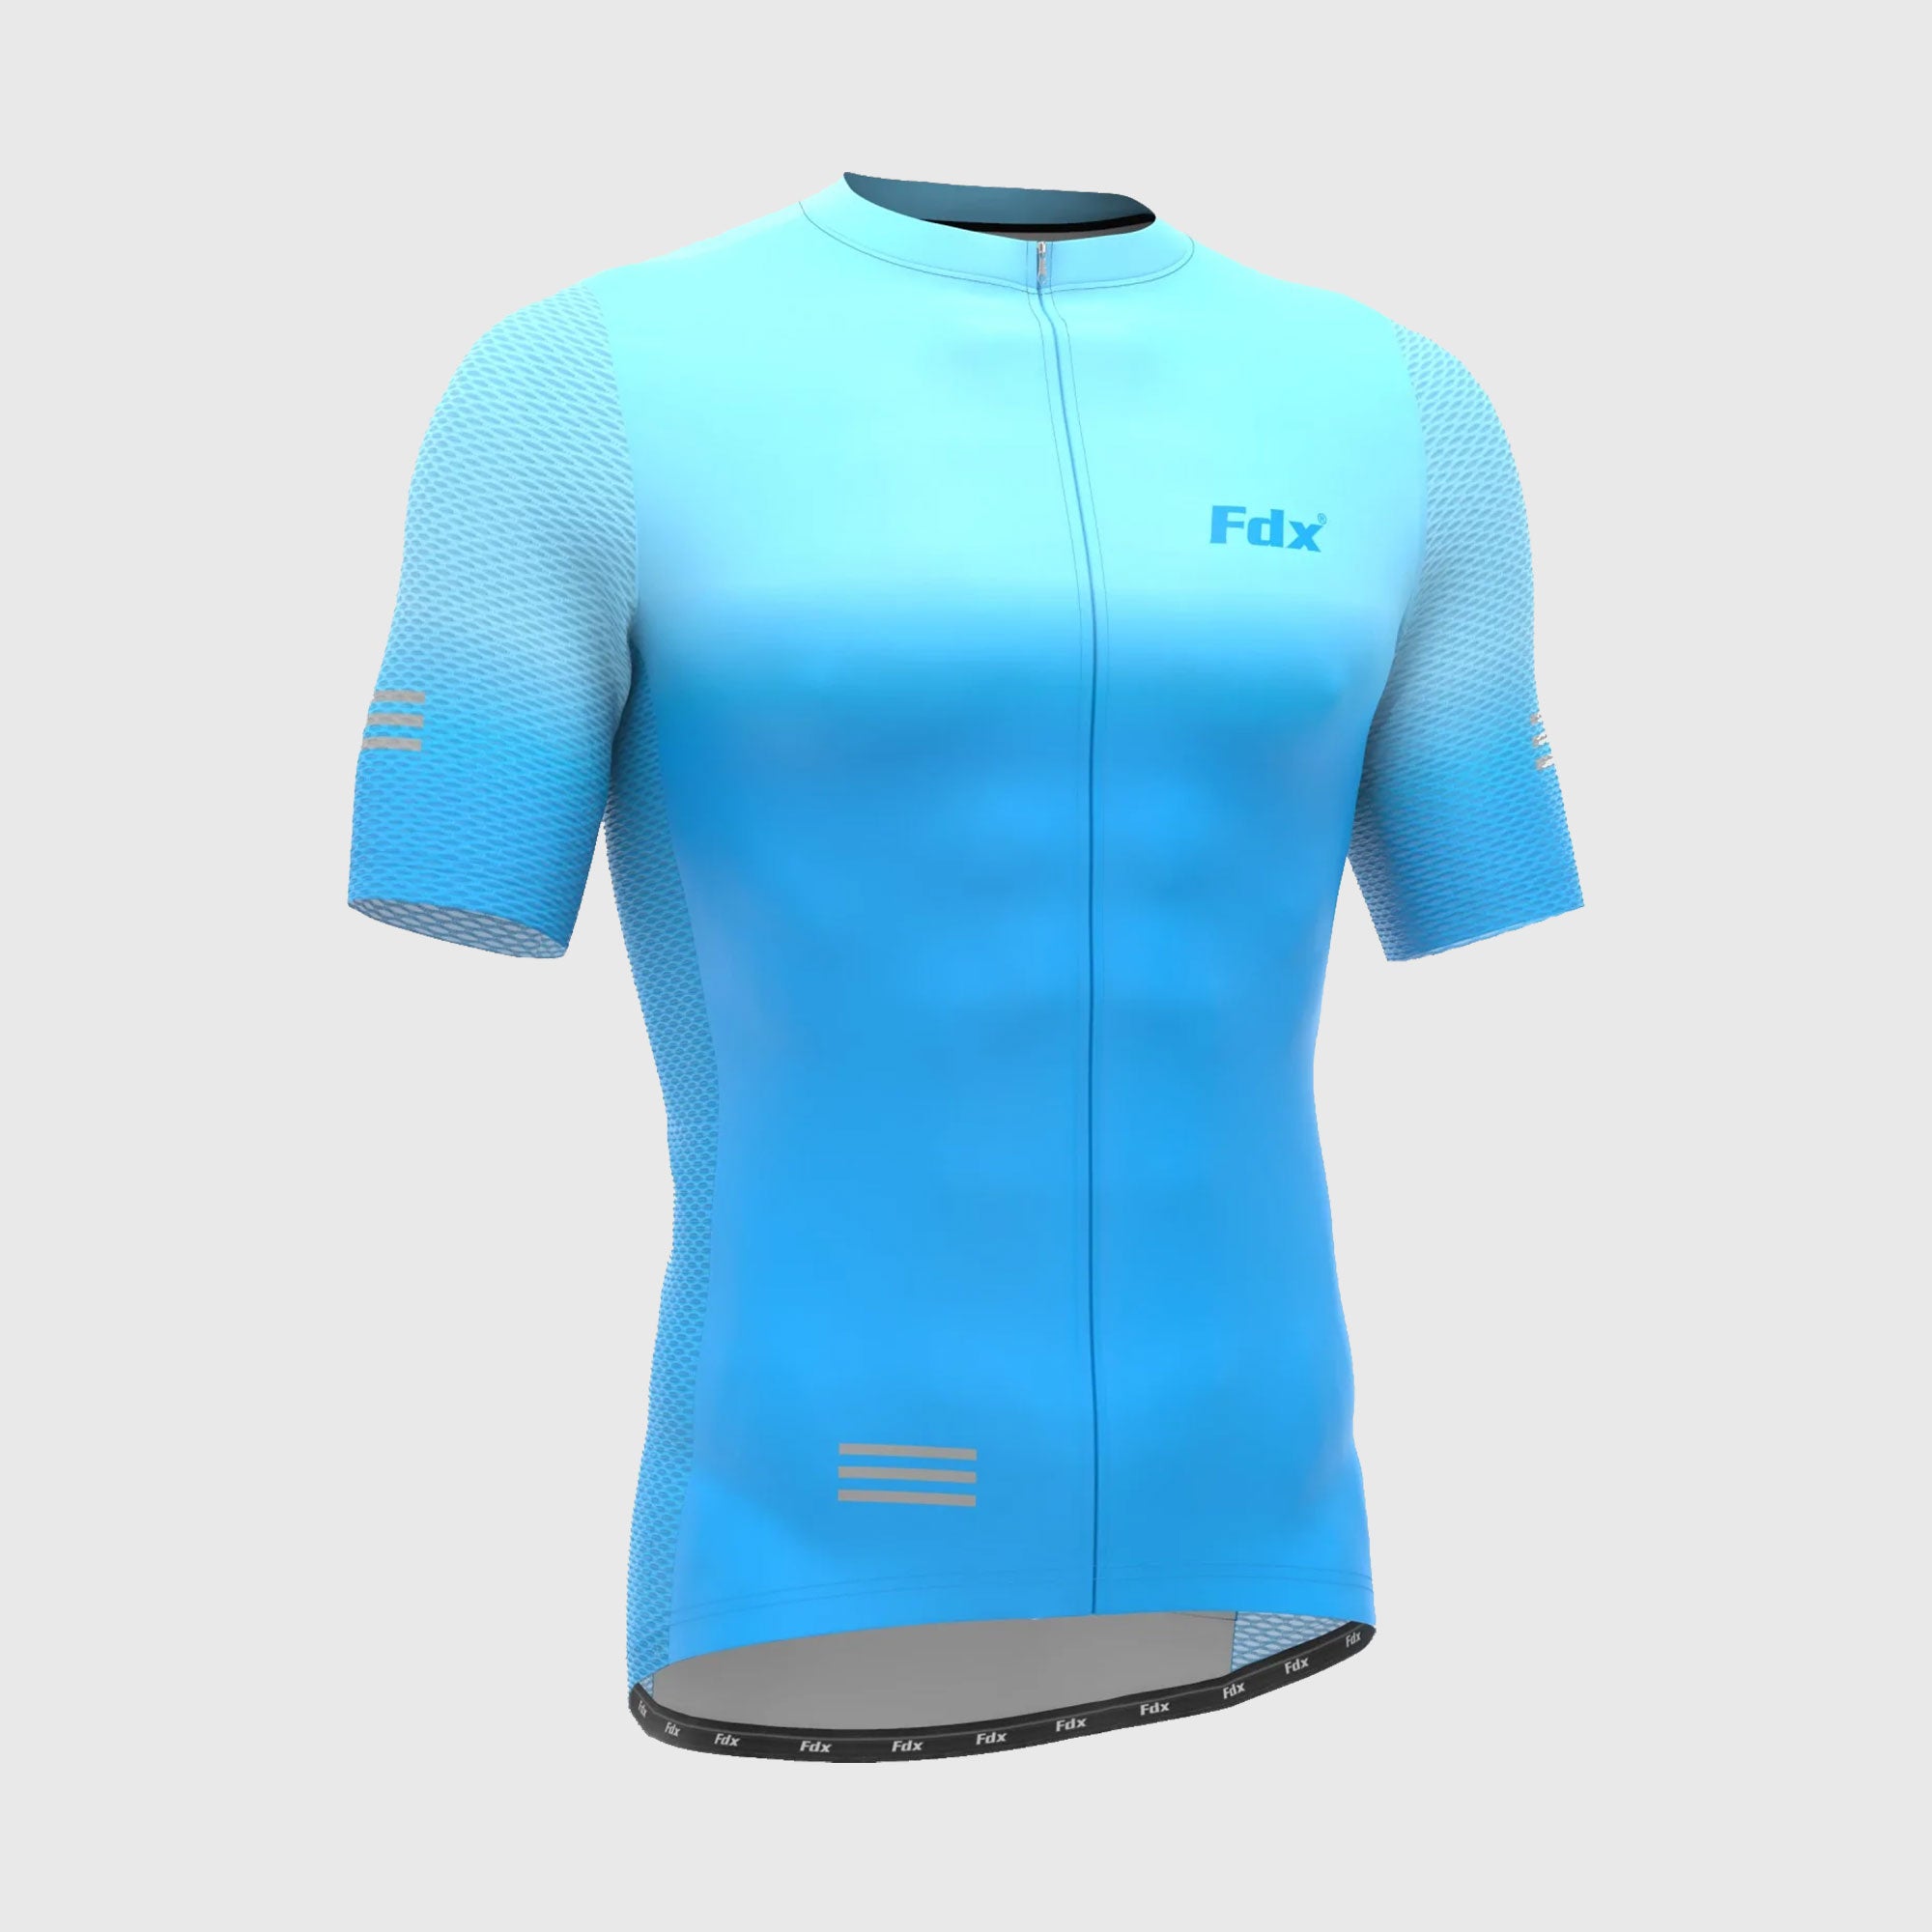 Fdx Men’s Blue best full zip short sleeves cycling jersey indoor & outdoor Hi-Viz Reflective details breathable summer lightweight biking top, skin friendly Hi-Viz Reflective half sleeves cycling mesh shirt for riding with two back pockets